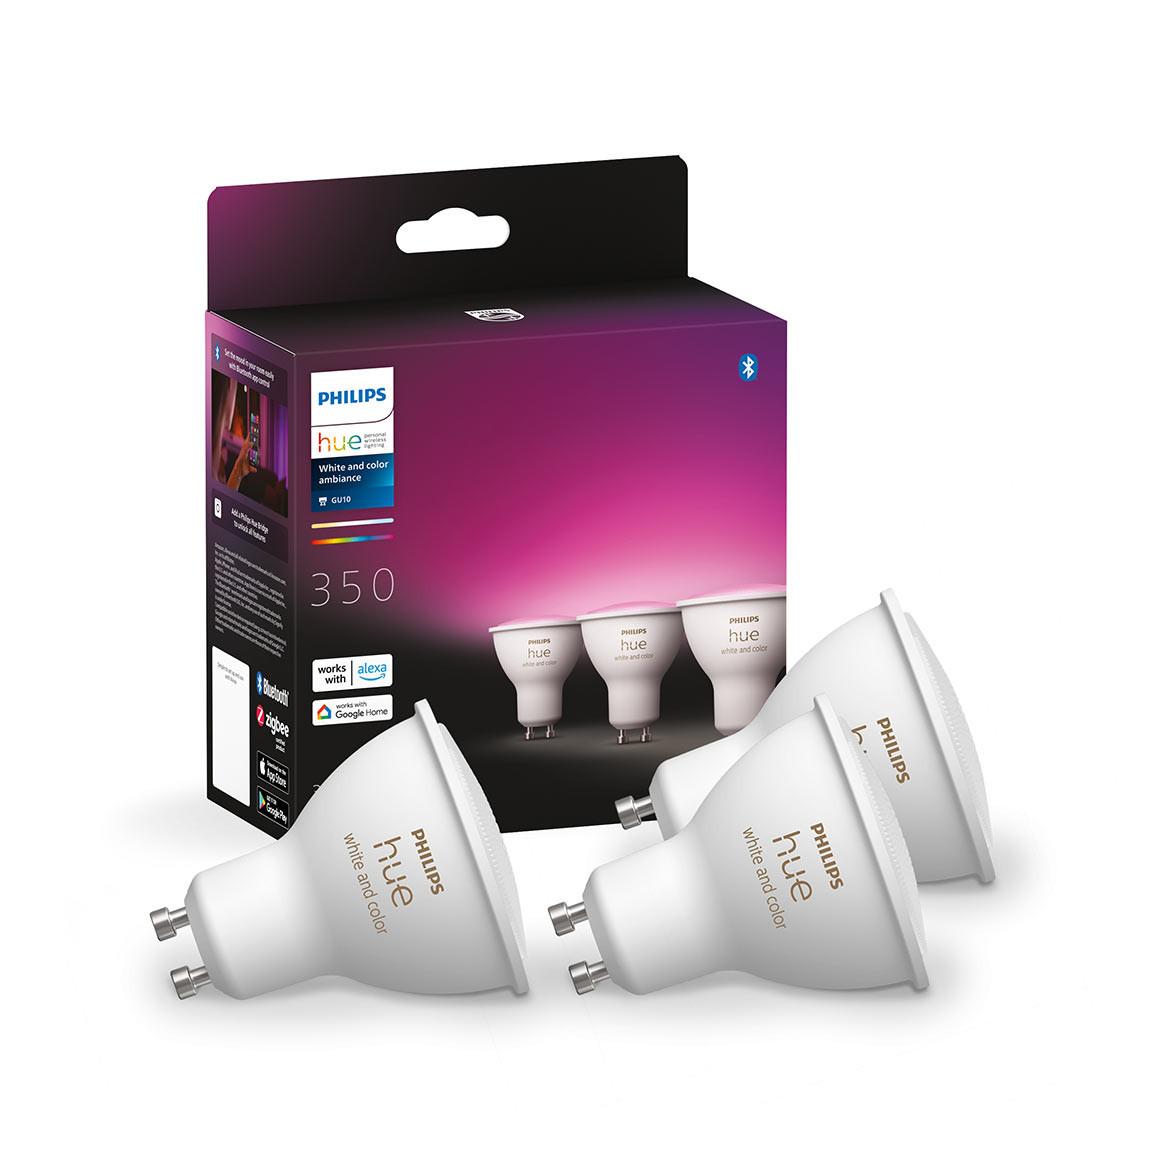 Philips Hue White & Color Ambiance GU10 Bluetooth Starter Kit mit 6 Lampen_Verpackung